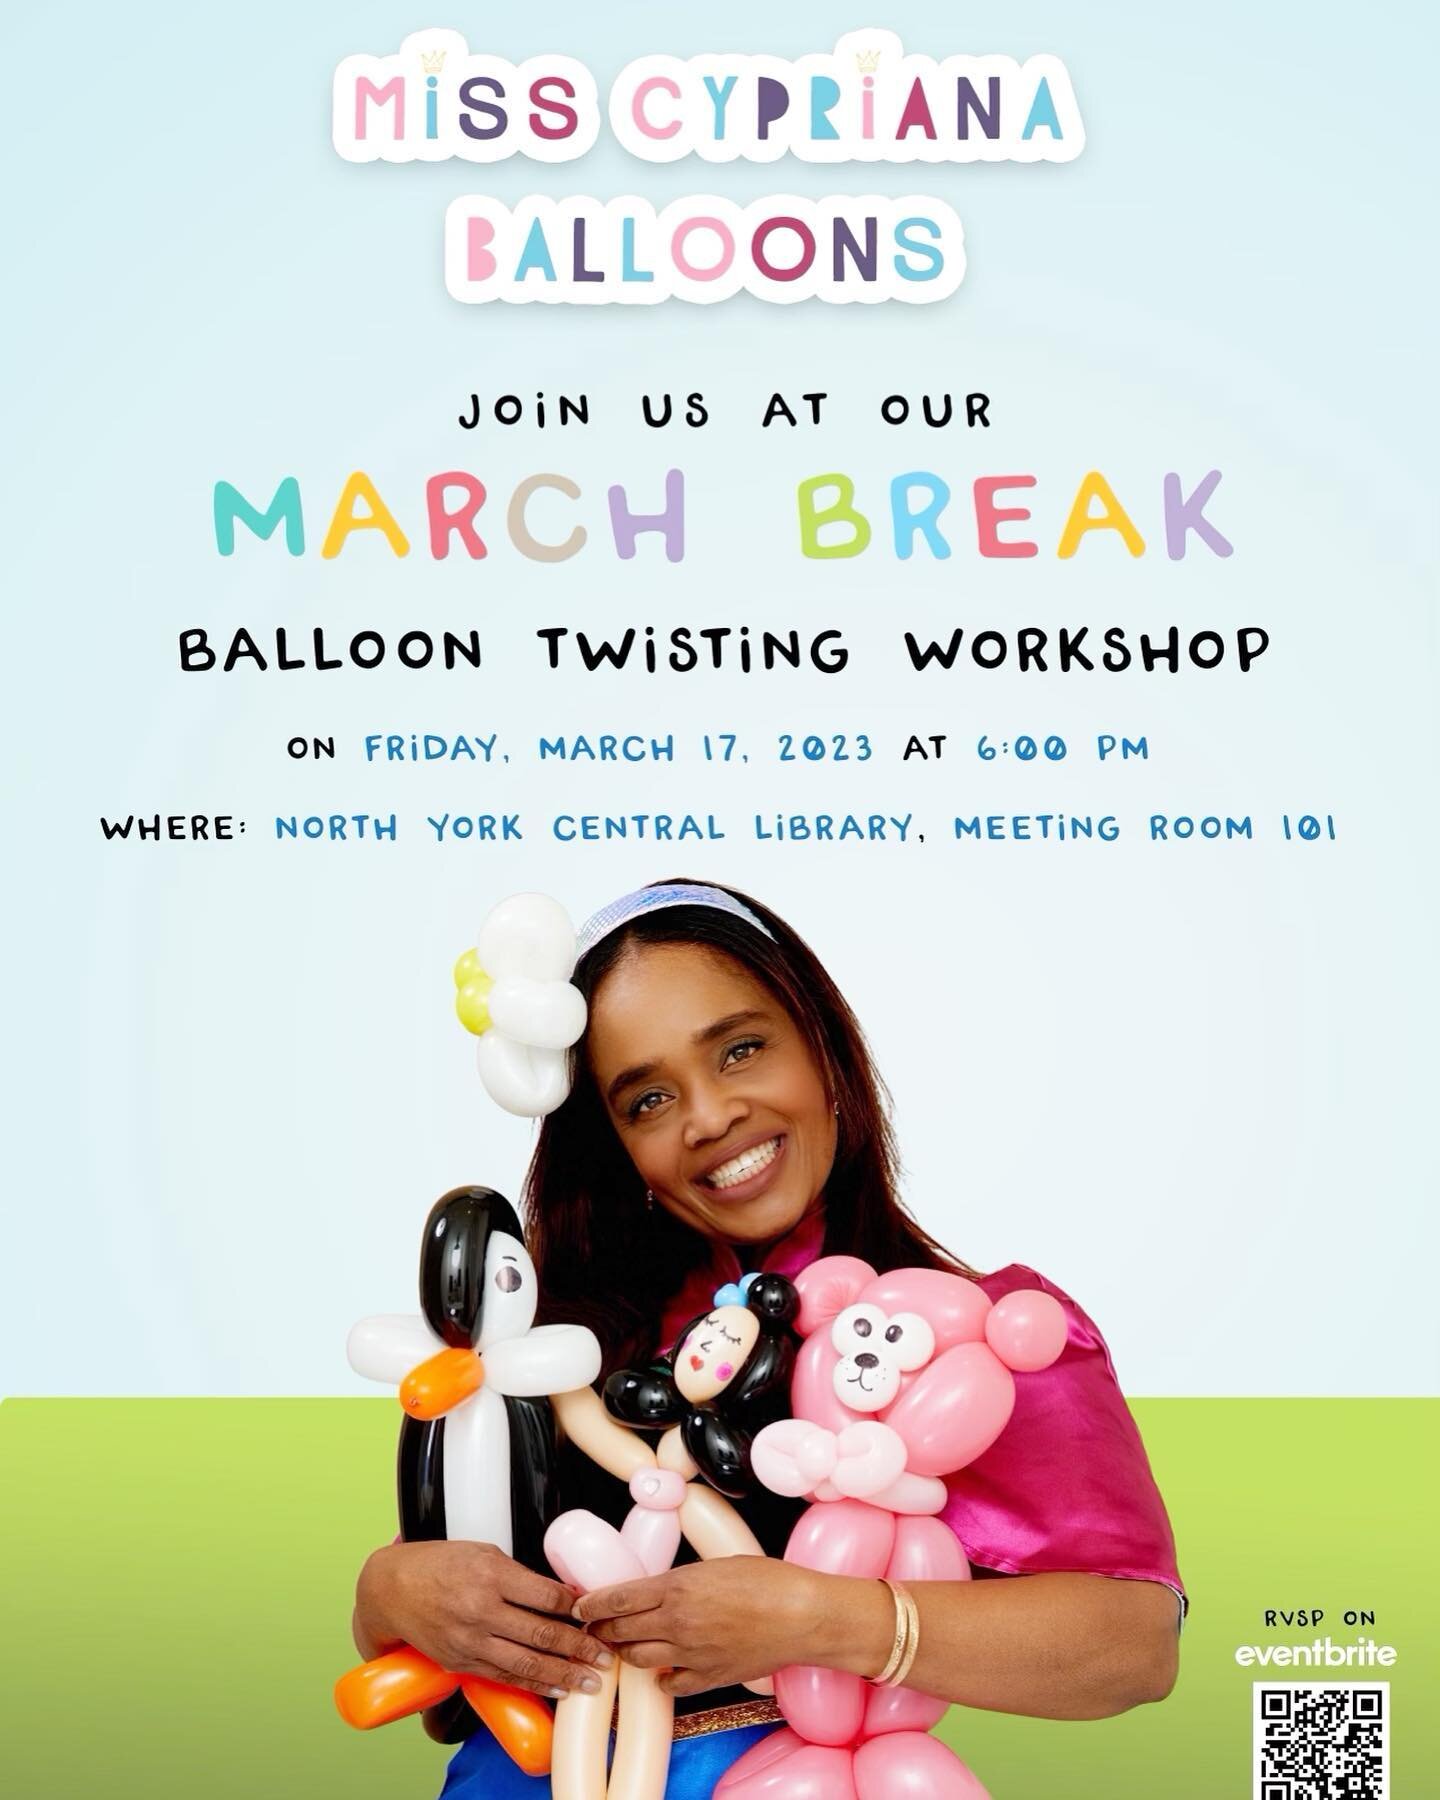 misscypriana.com-Our balloon twisting workshop is just one month away, and we want you to be there! Tickets are now available on eventbrite.